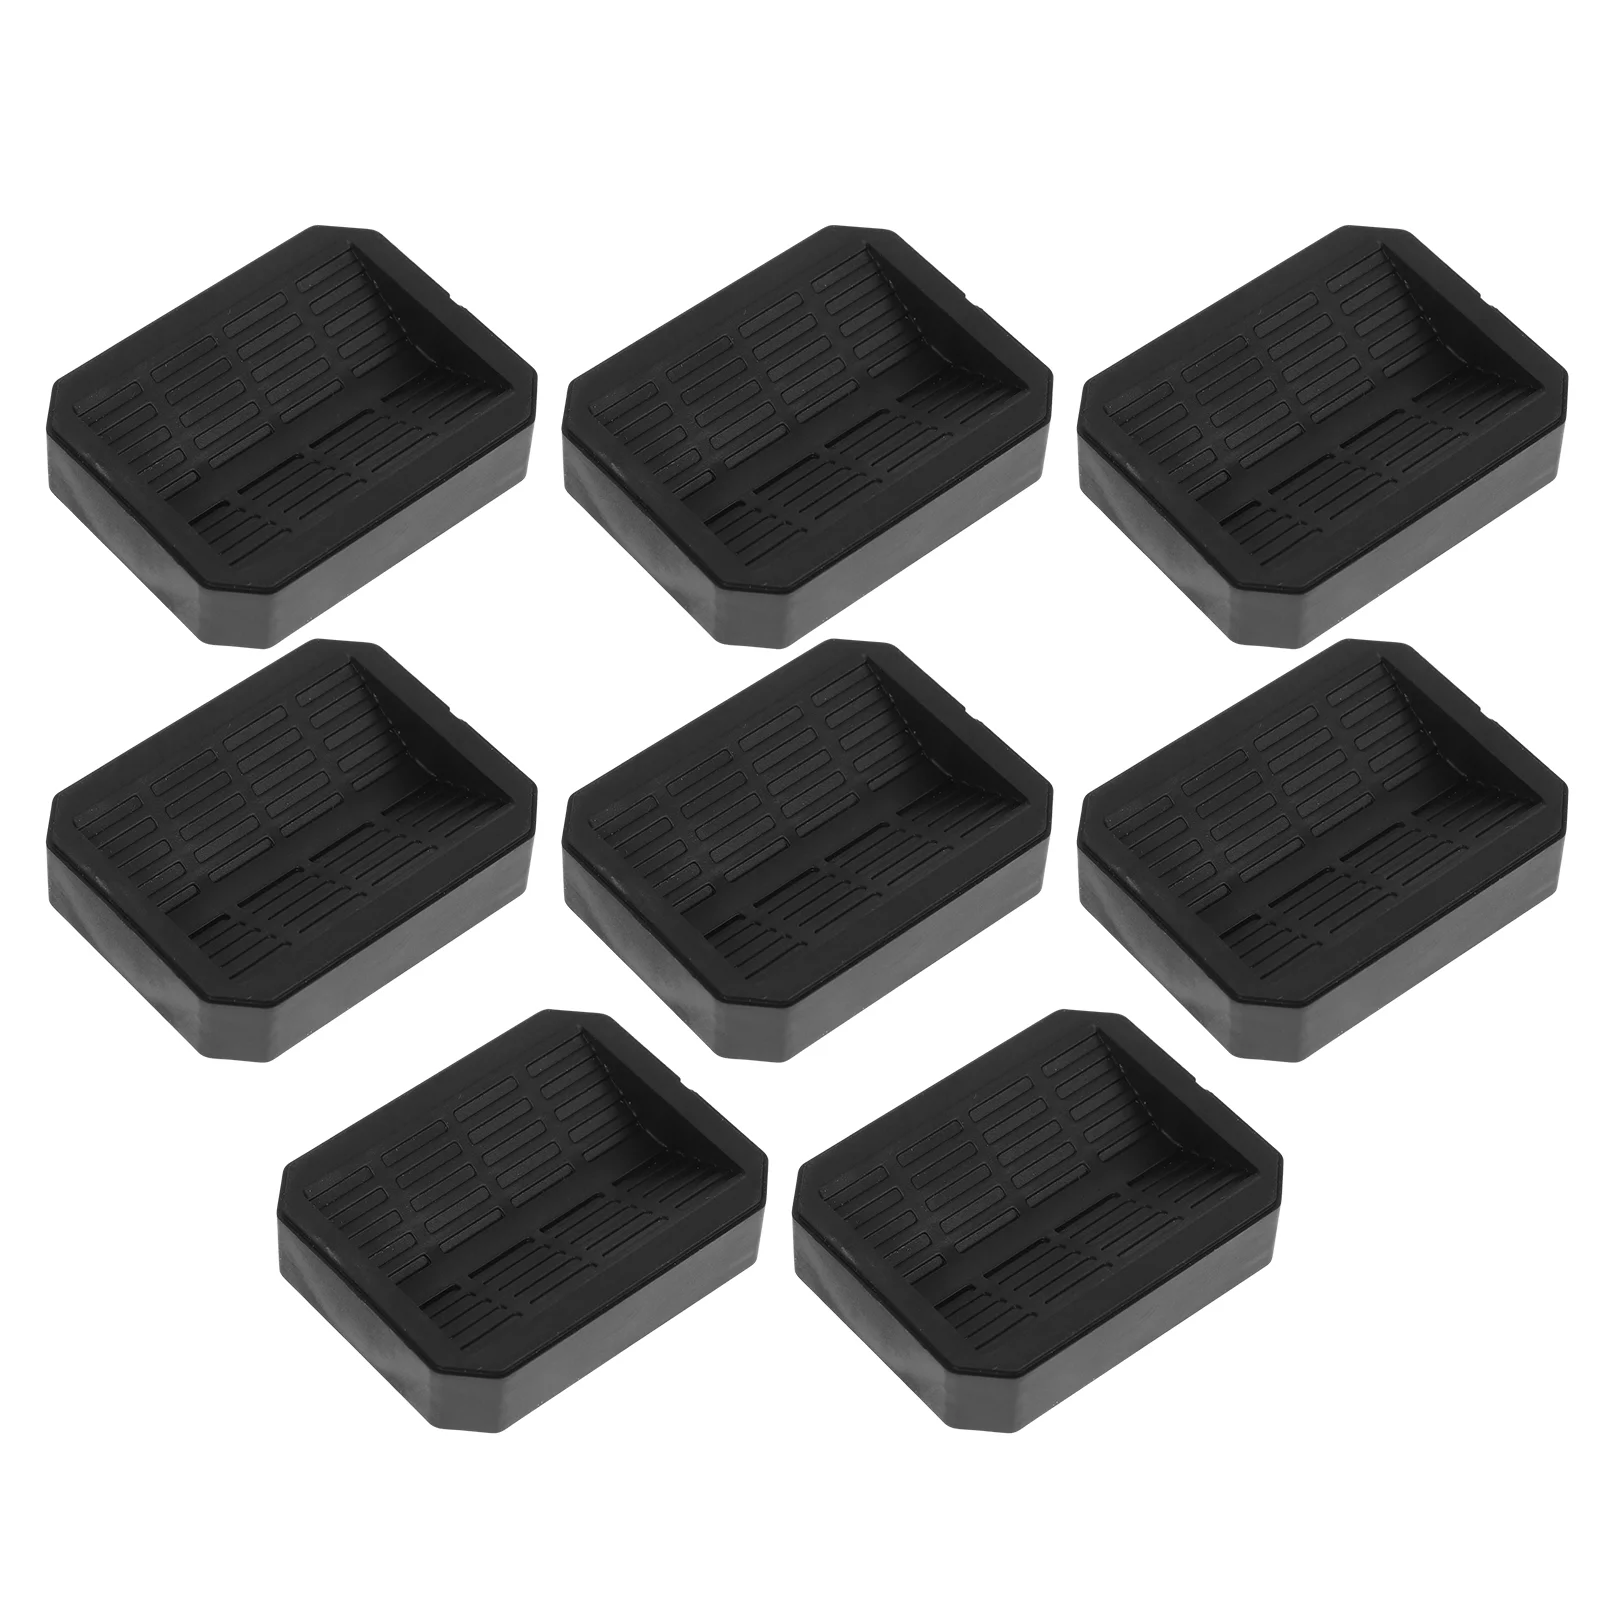 

Wheel Stopper Bed Stoppers Chair Ladder Furniture Cups Caster Pads Sofa Feet Anti Skid Castor Office Protector Silicone Kit Shoe